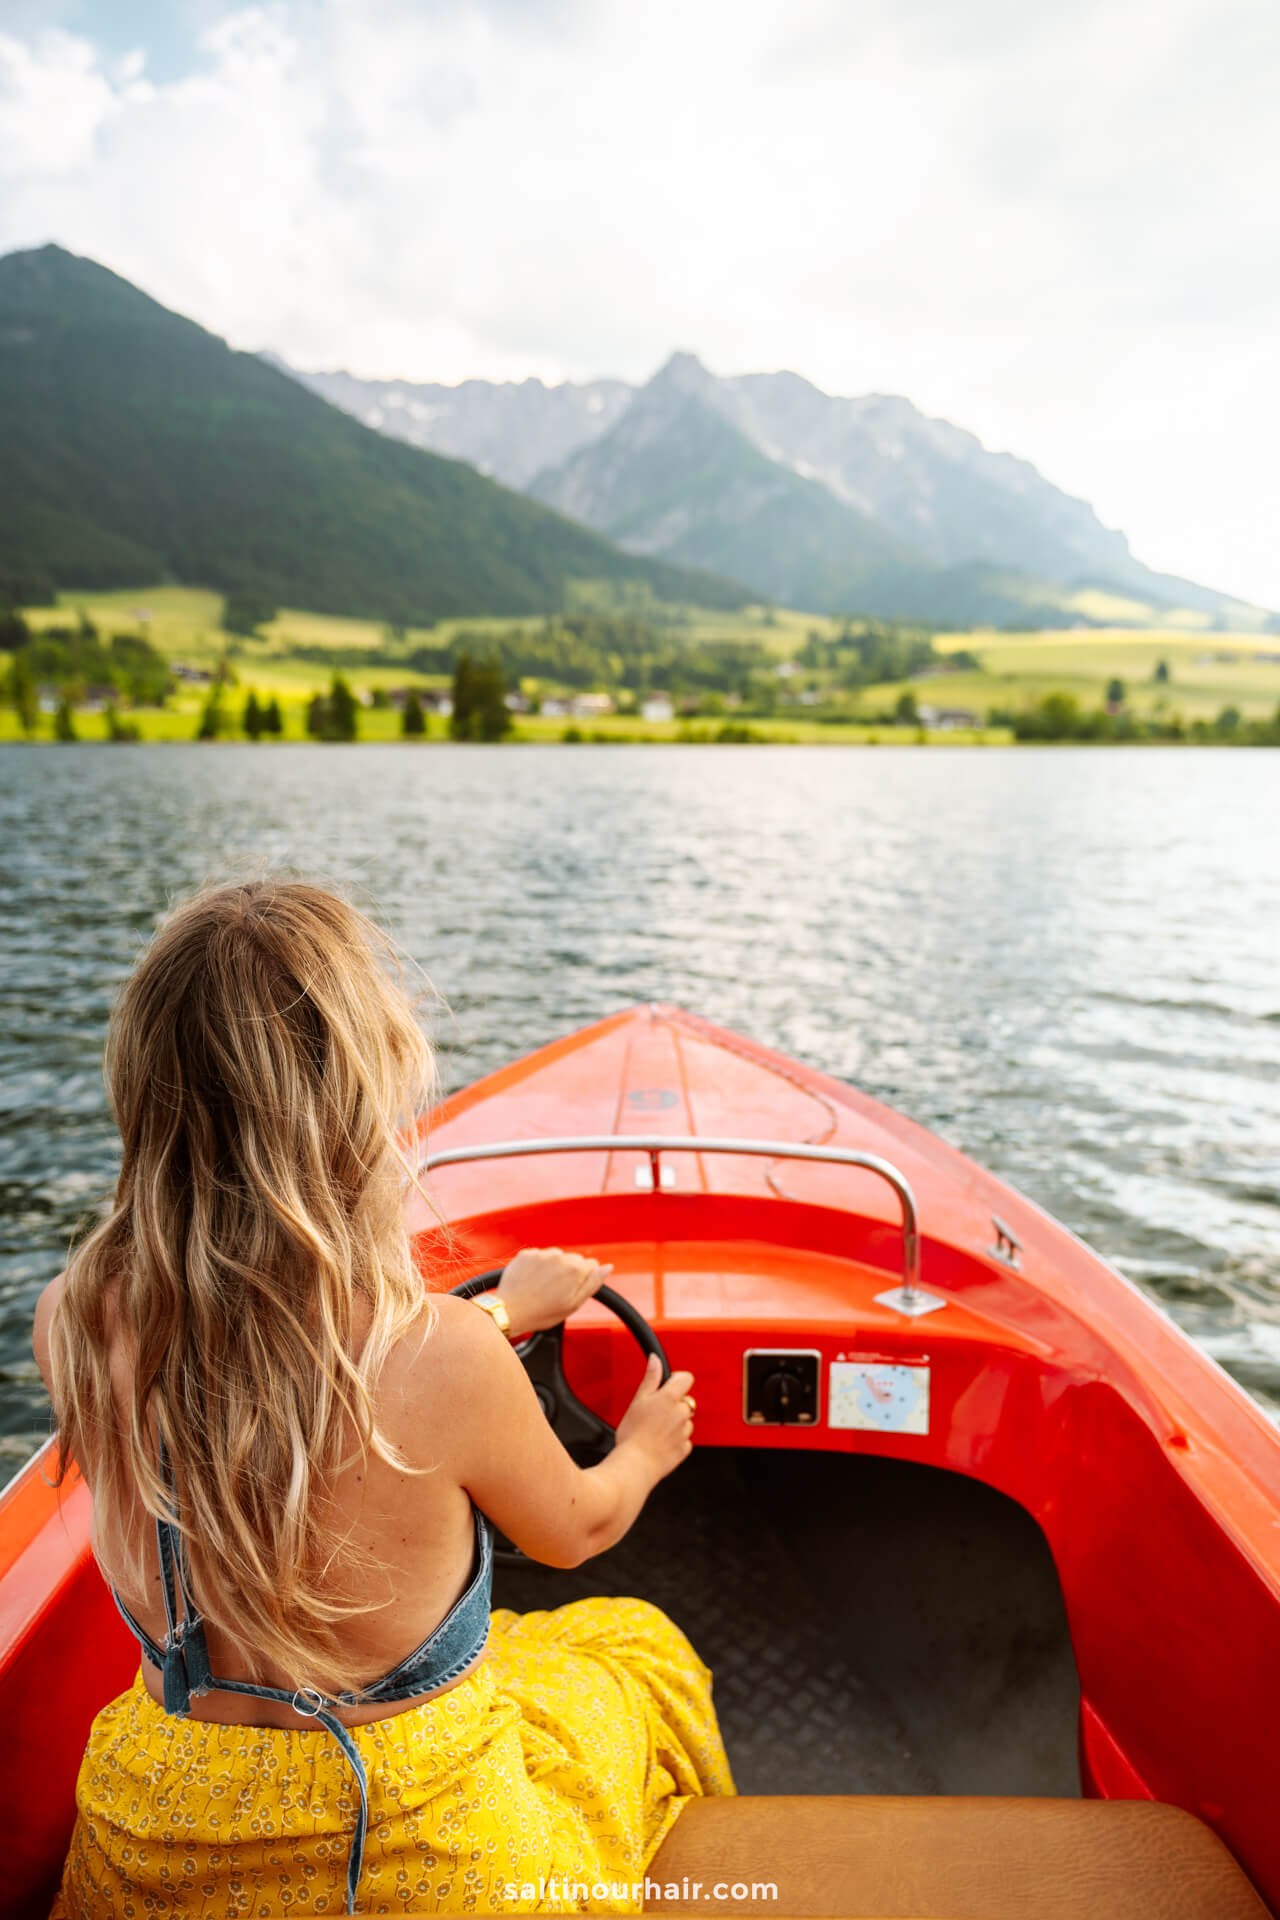 Things to do in Tyrol Austria rent boat Walchsee